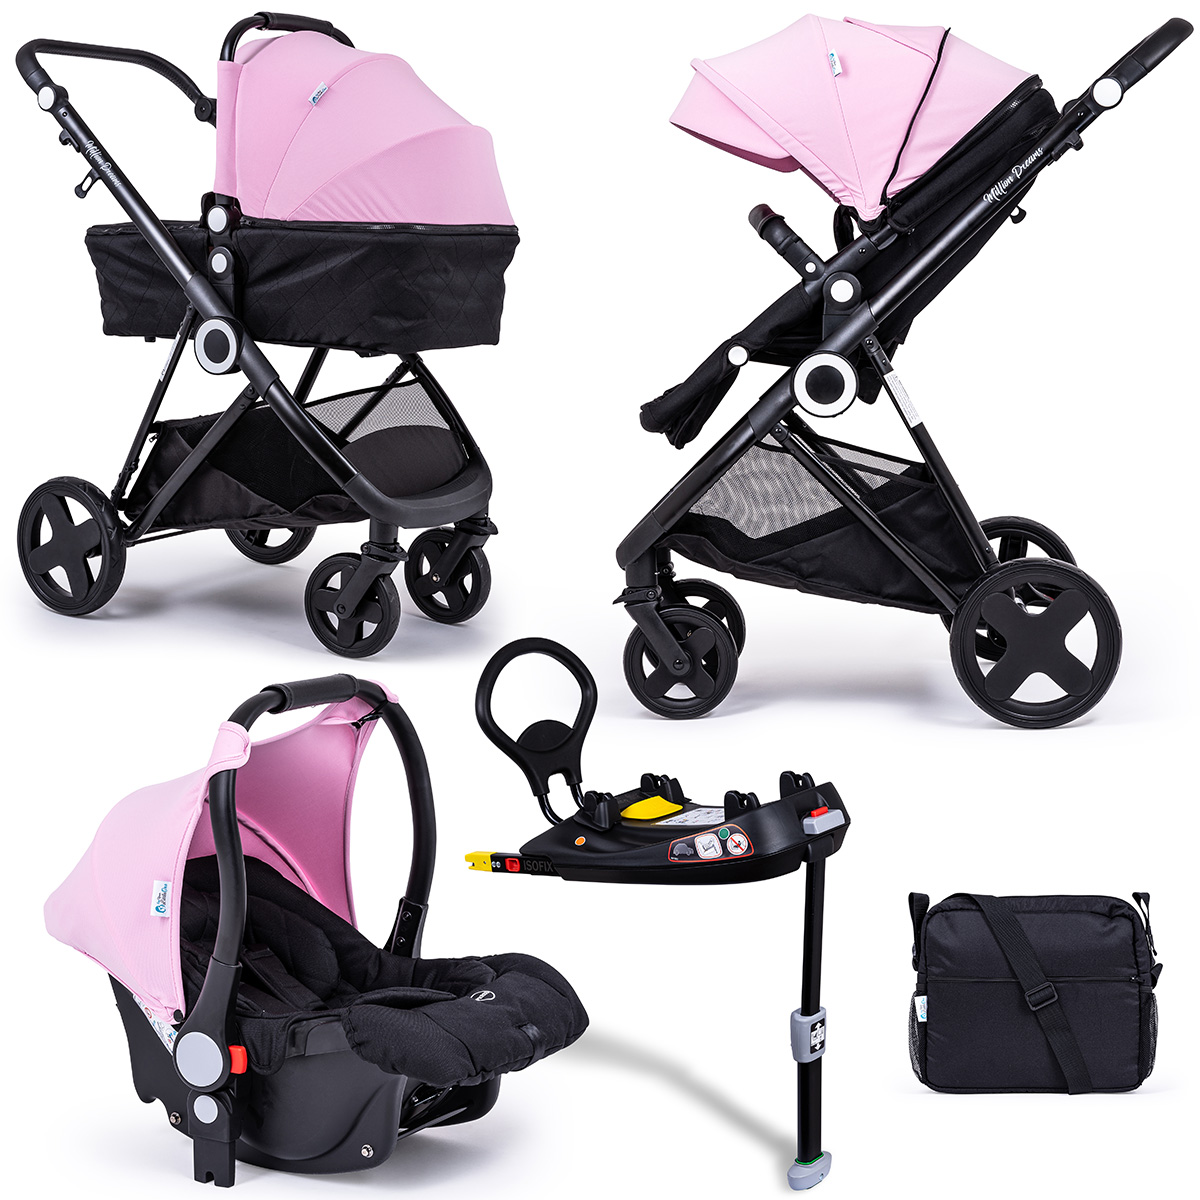 push chair Amazon product photographer services